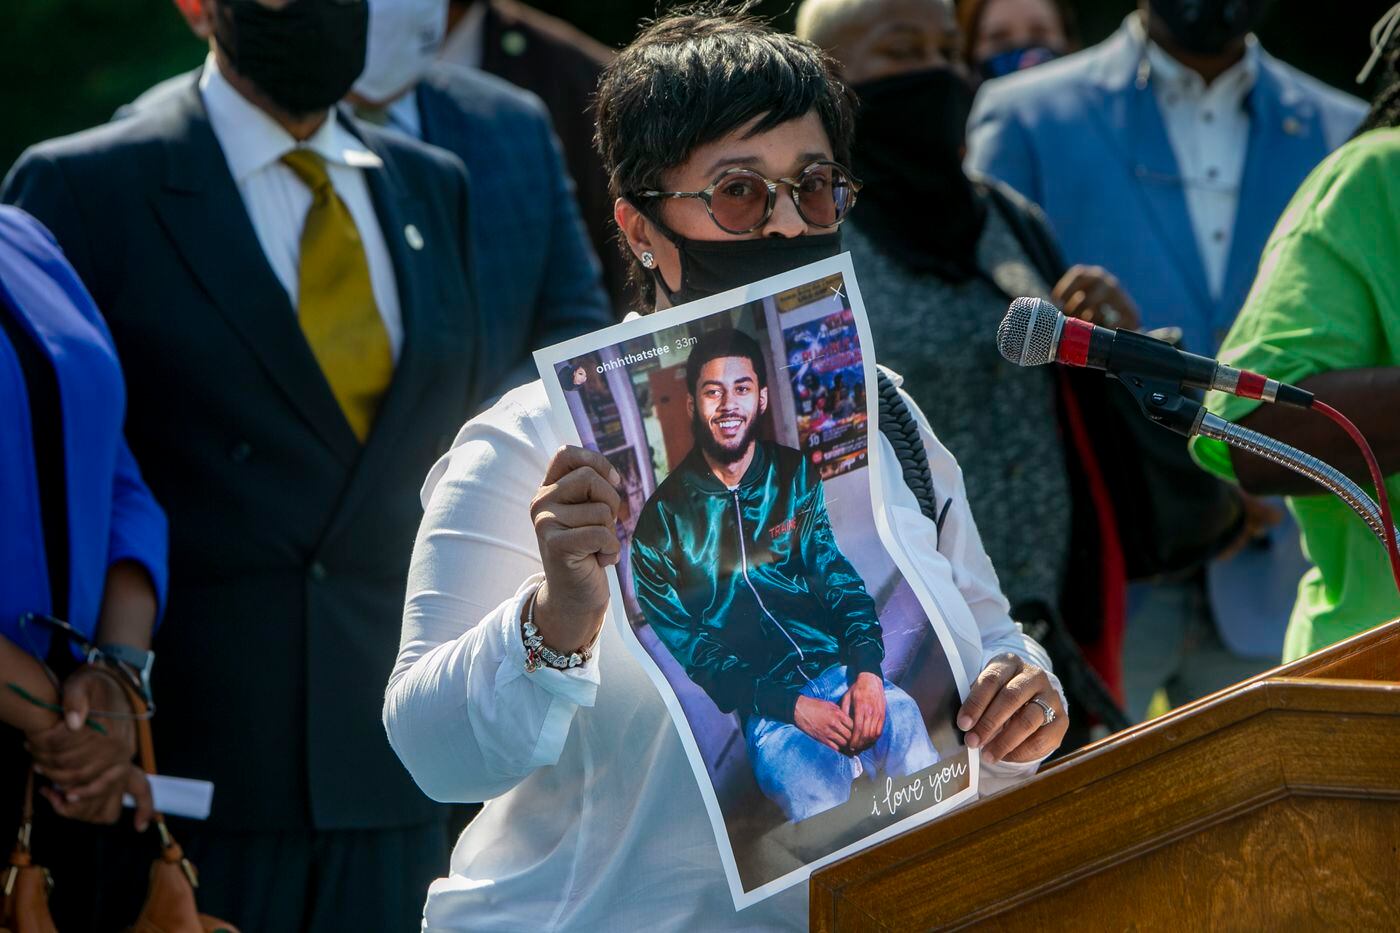 Tamika Morales holds up a picture of her son Ahmad Morales who was shot and killed in Point Breeze in July.